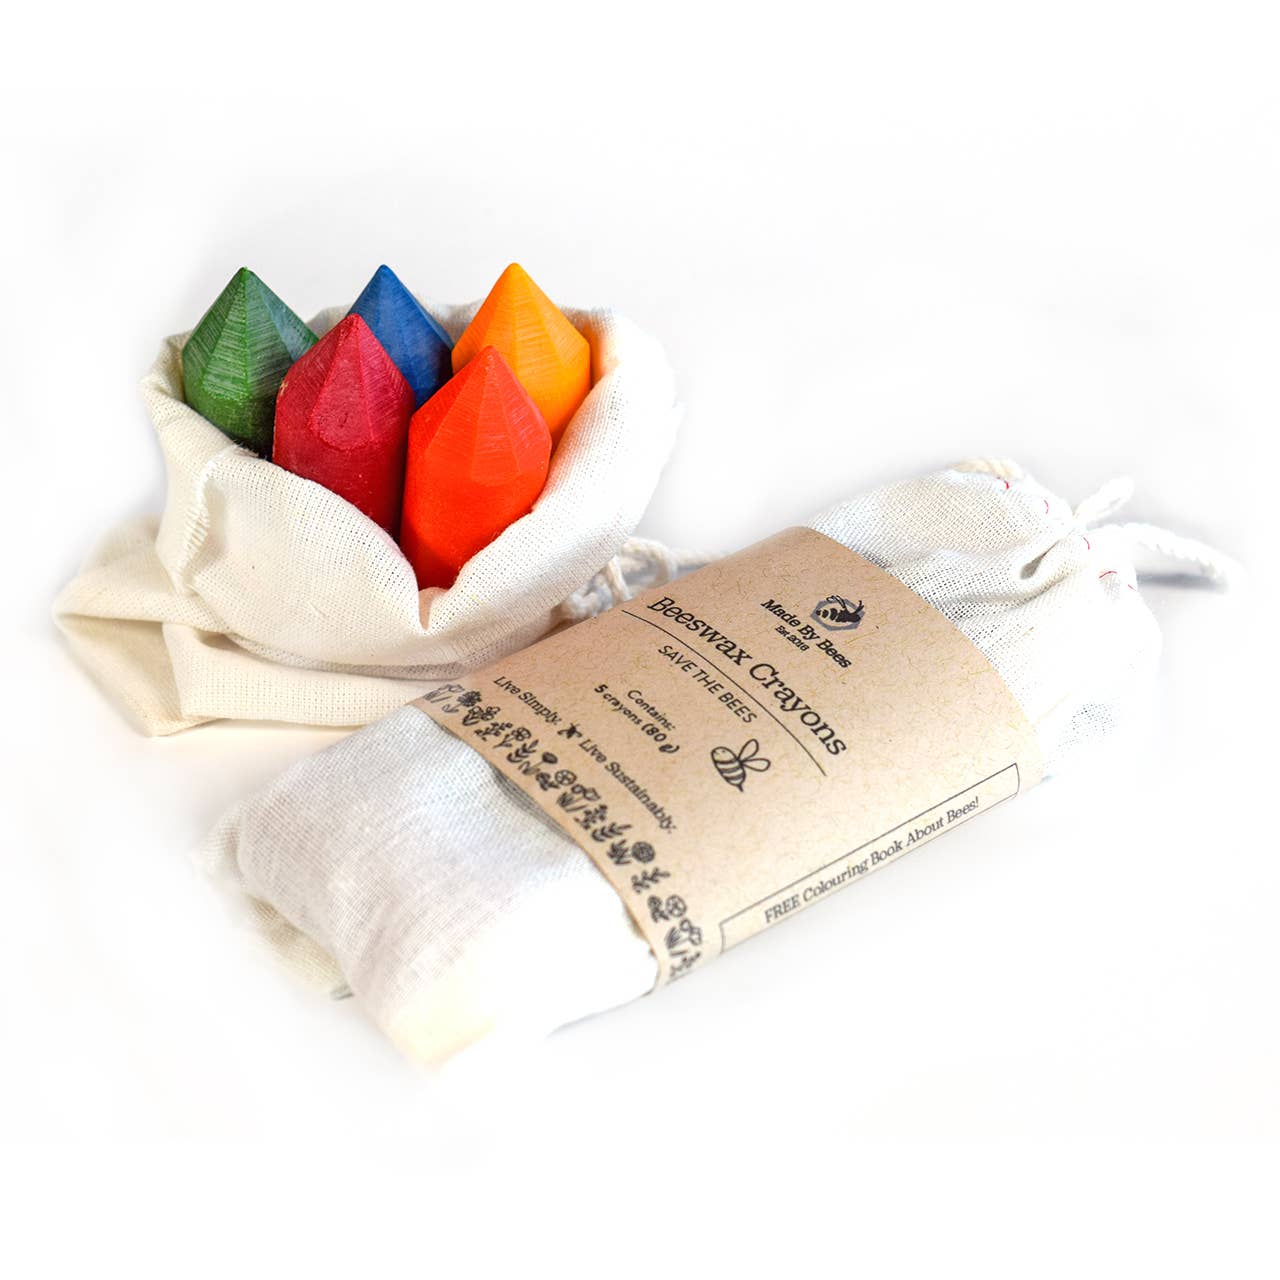 Made By Bees Limited - Beeswax Crayons, Handmade (Set of 5)